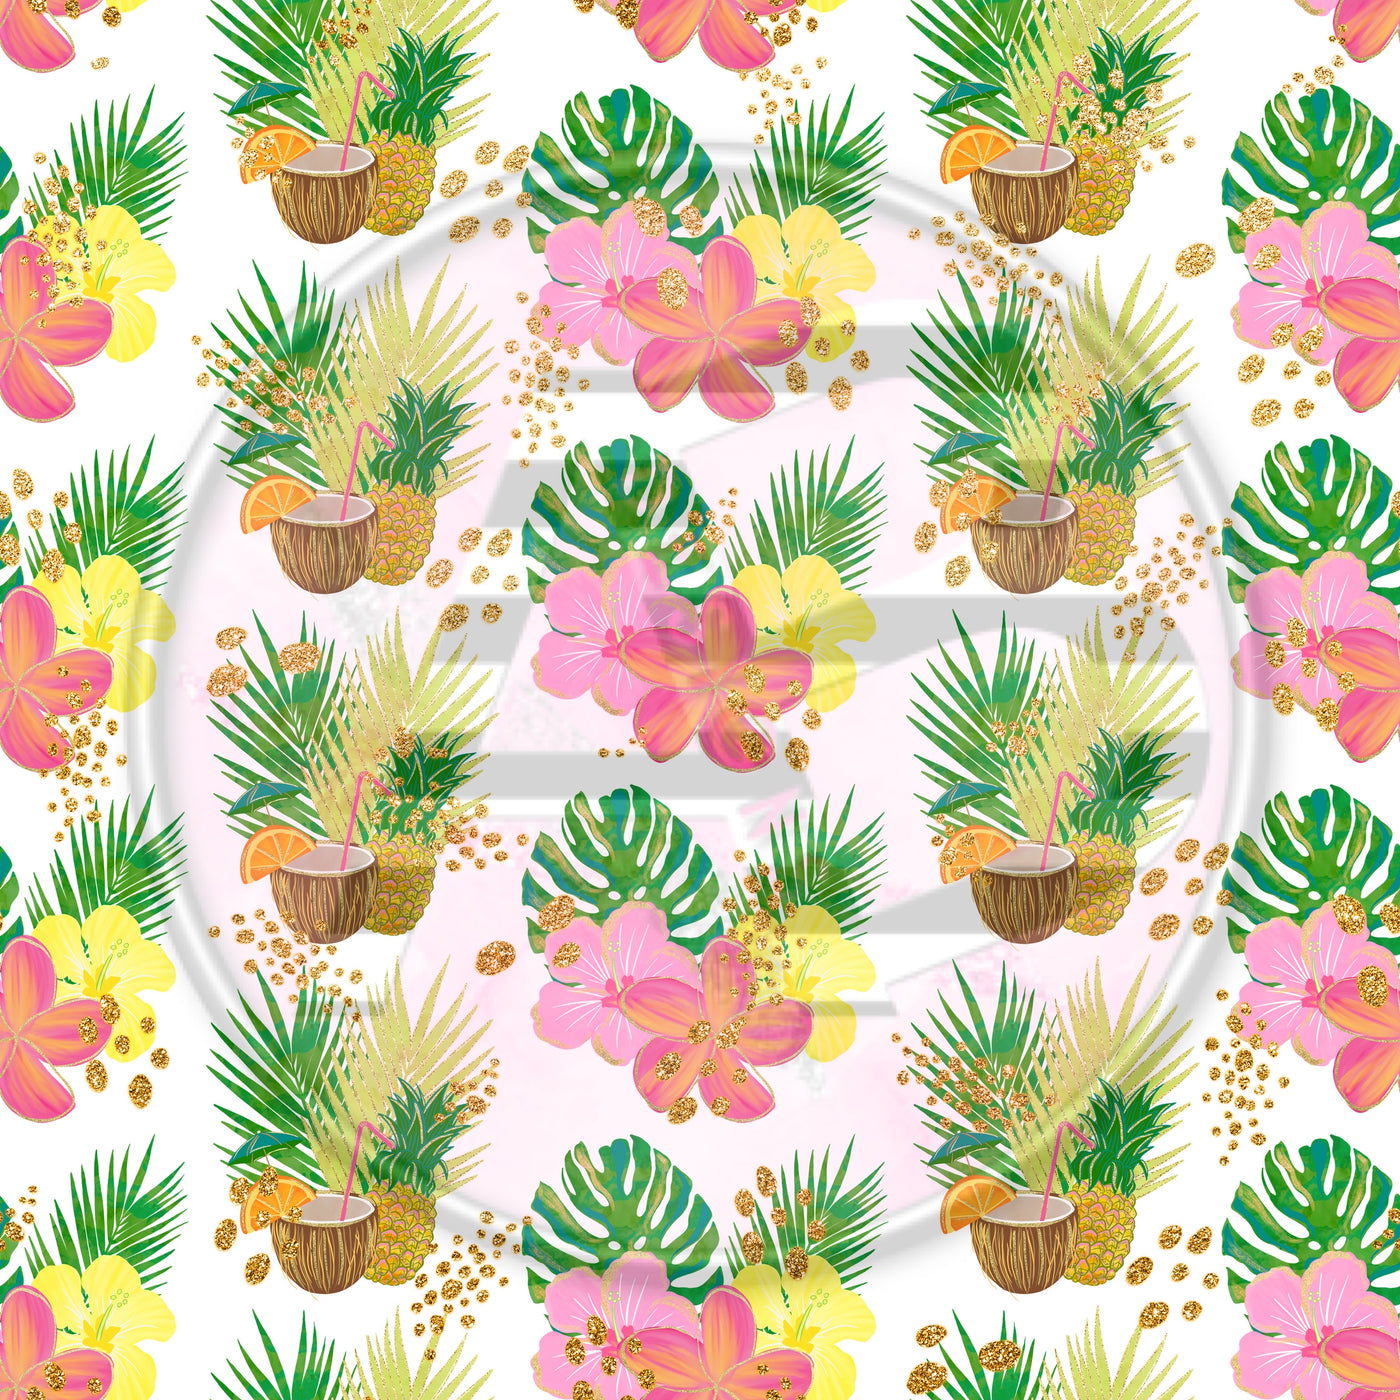 Adhesive Patterned Vinyl - Tropical 932